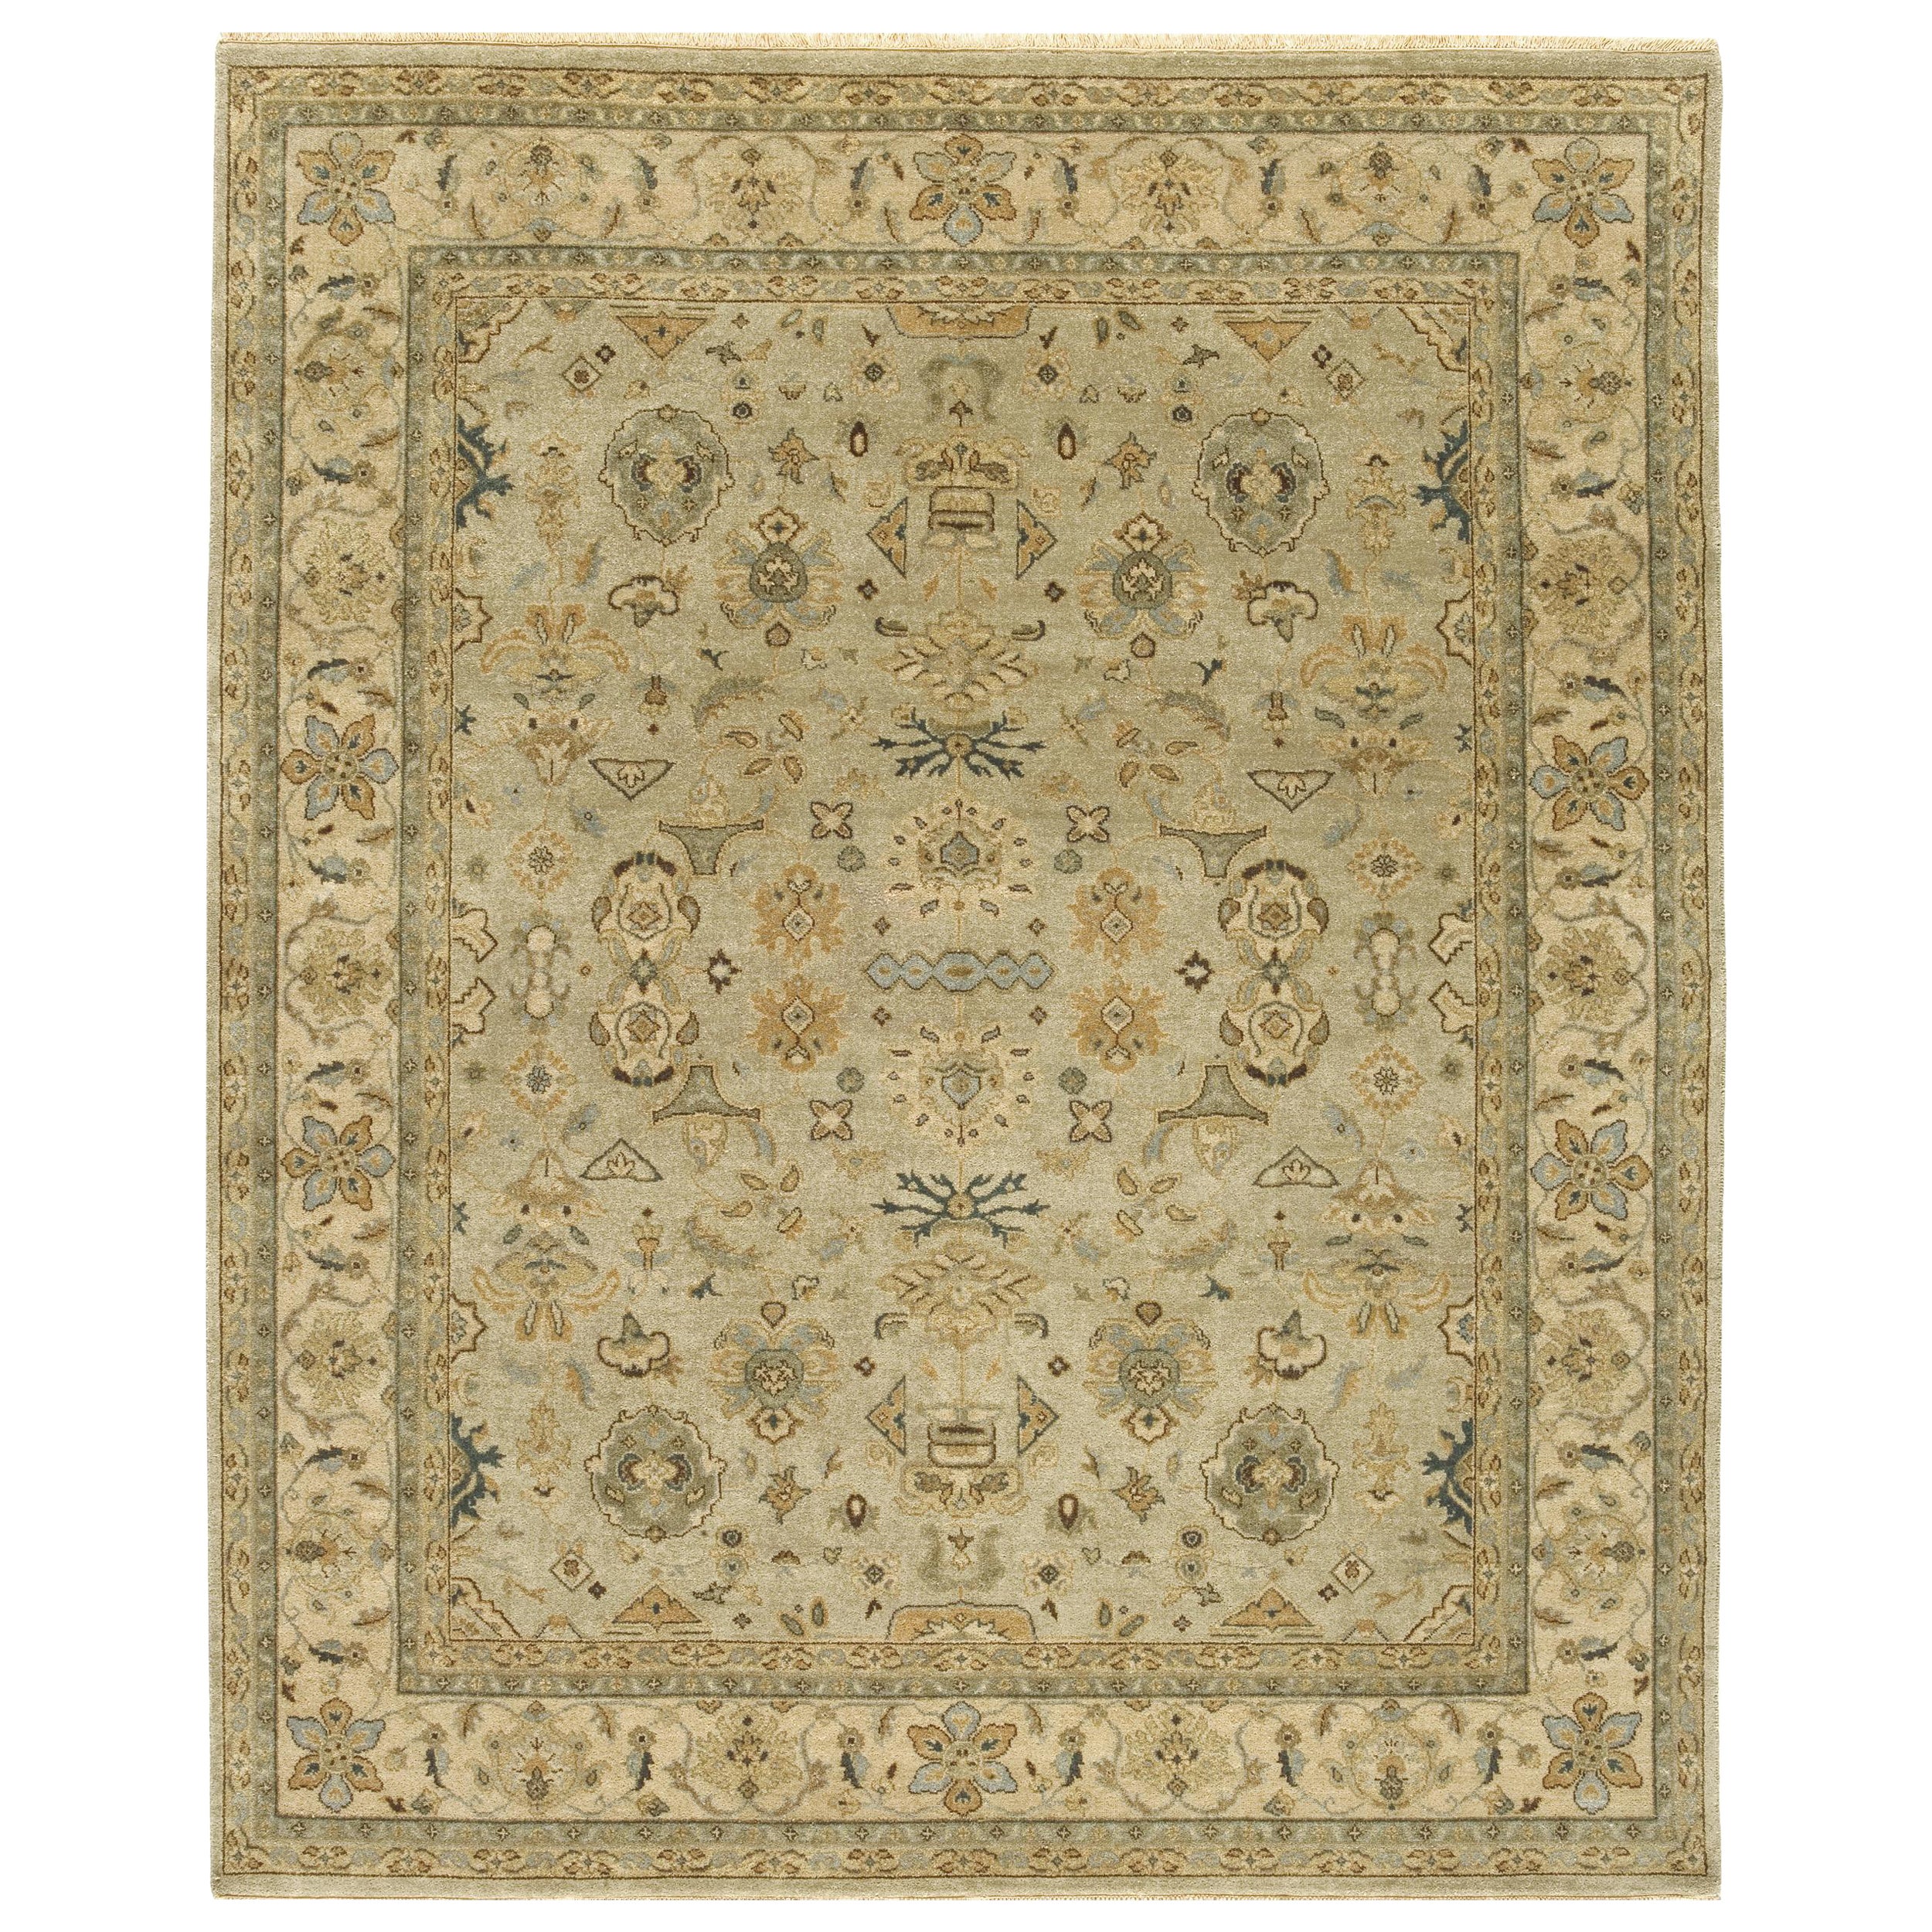 Luxury Traditional Hand-Knotted Mahal Opal & Cream 11x19 Rug